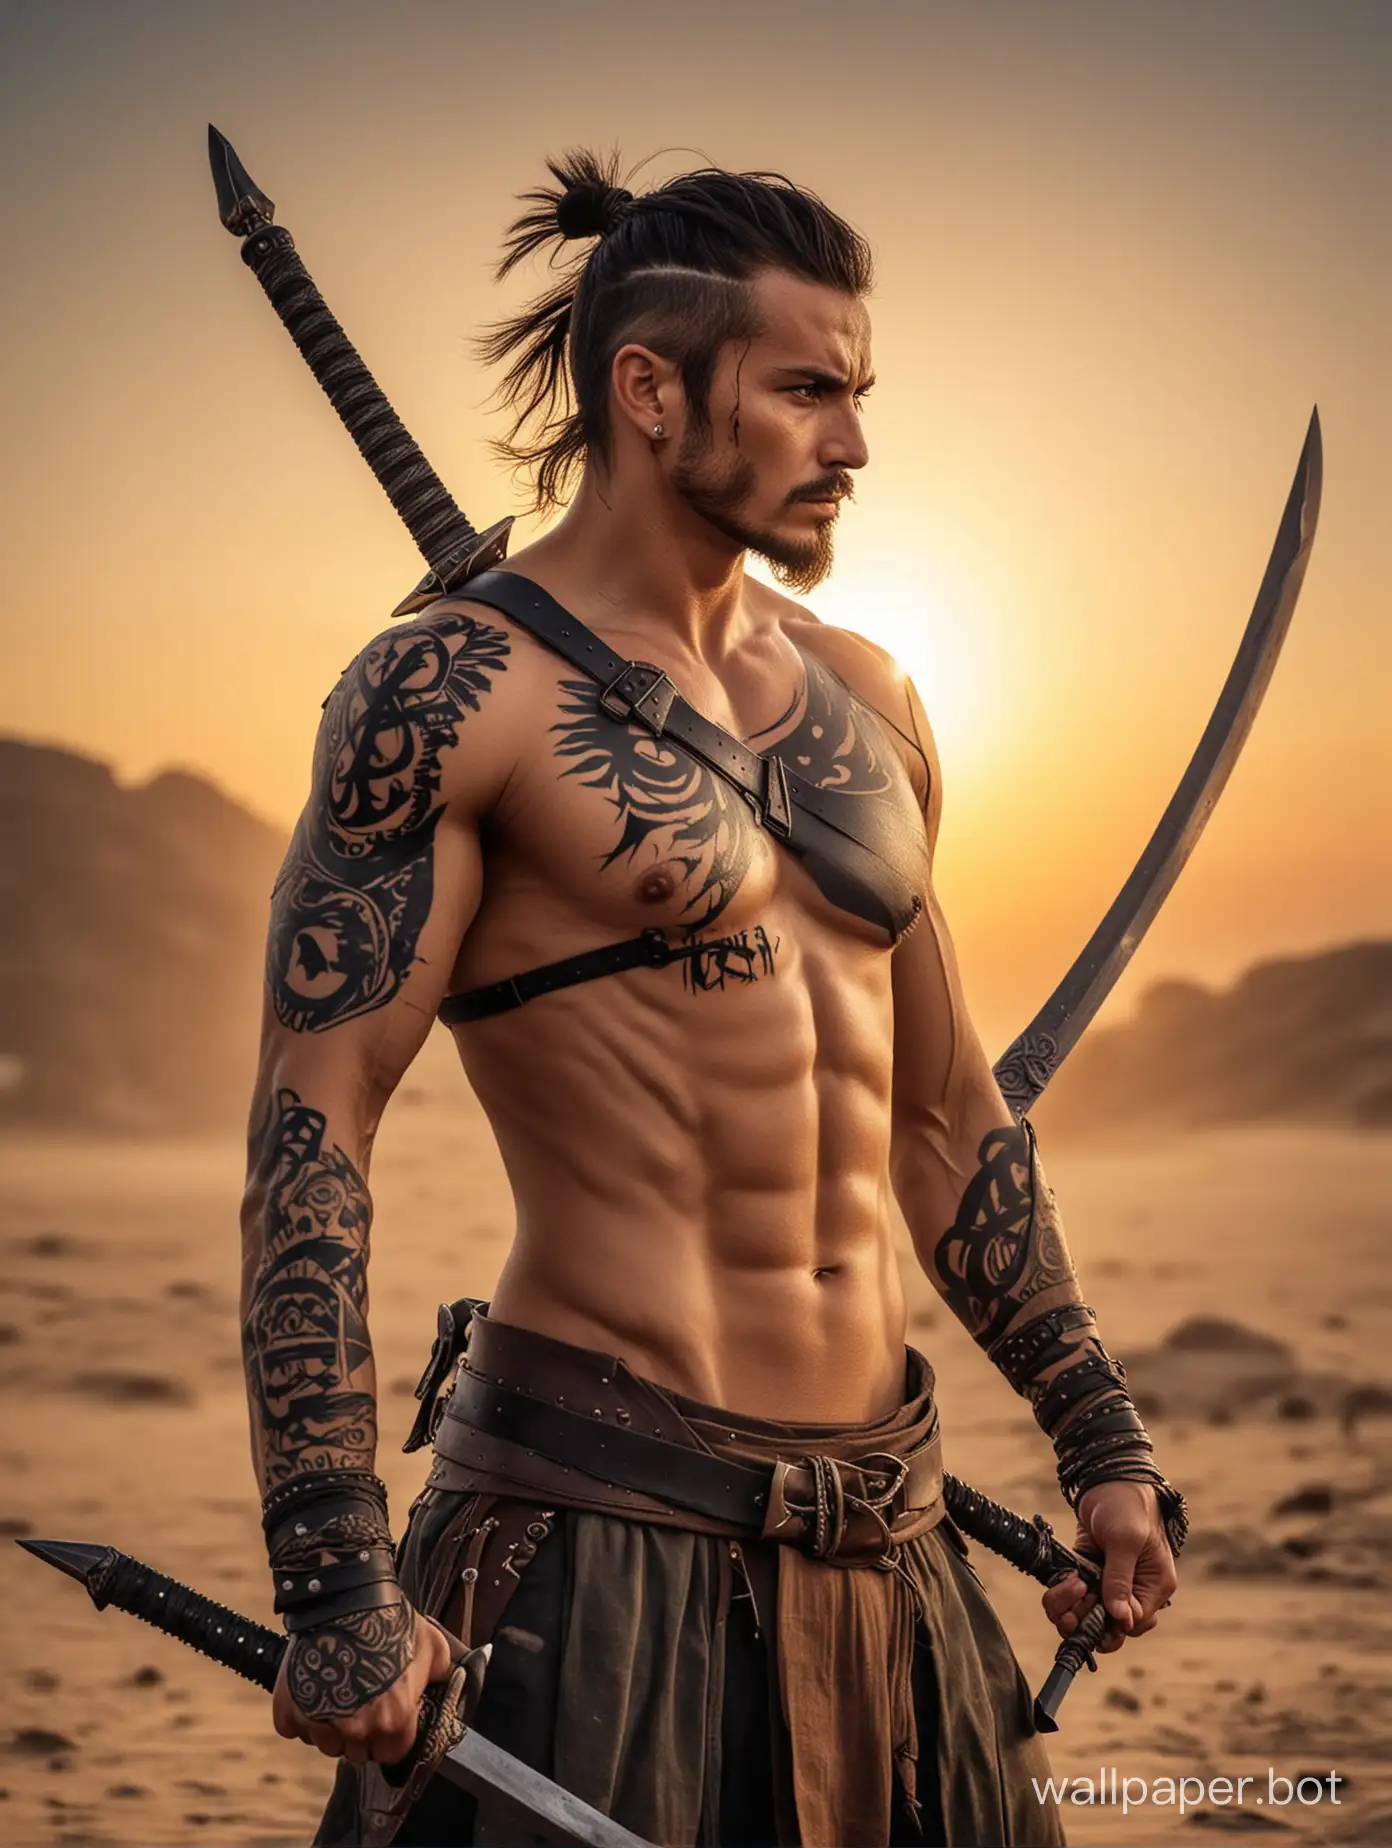 DualSword-Warrior-Battling-at-Sunset-with-Chest-Tattoo